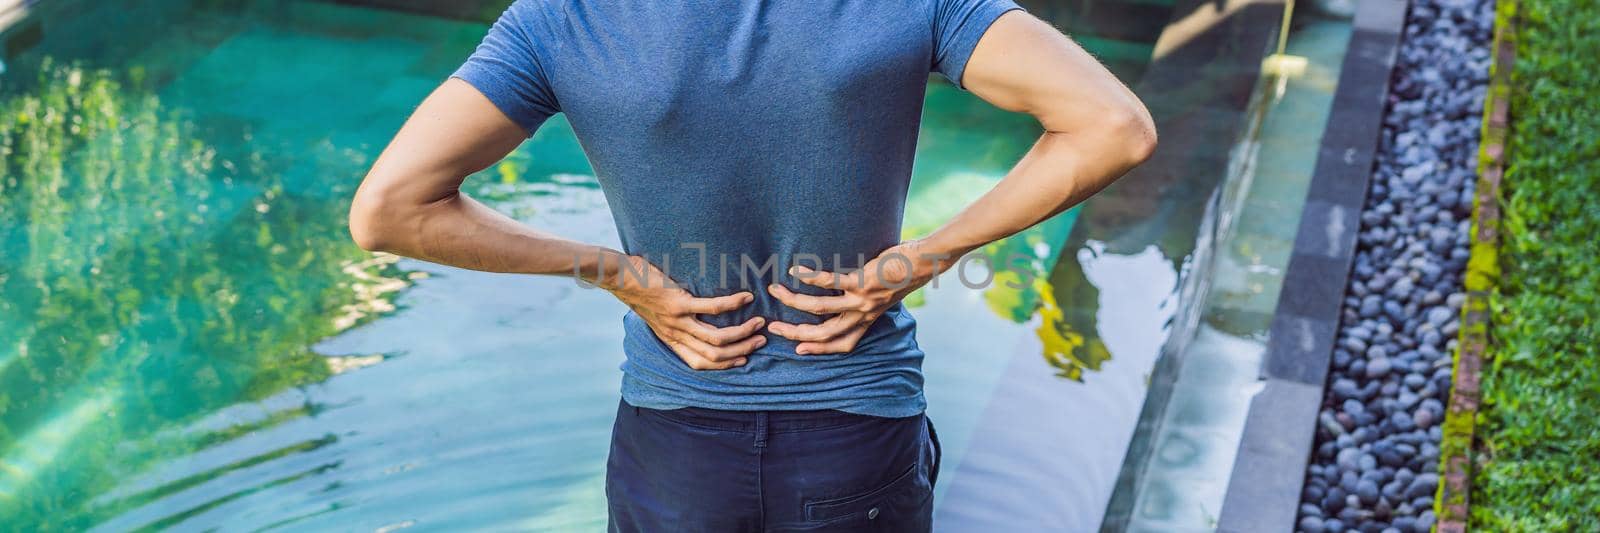 Men's back hurts against the backdrop of the pool. Pool helps with back pain BANNER, LONG FORMAT by galitskaya